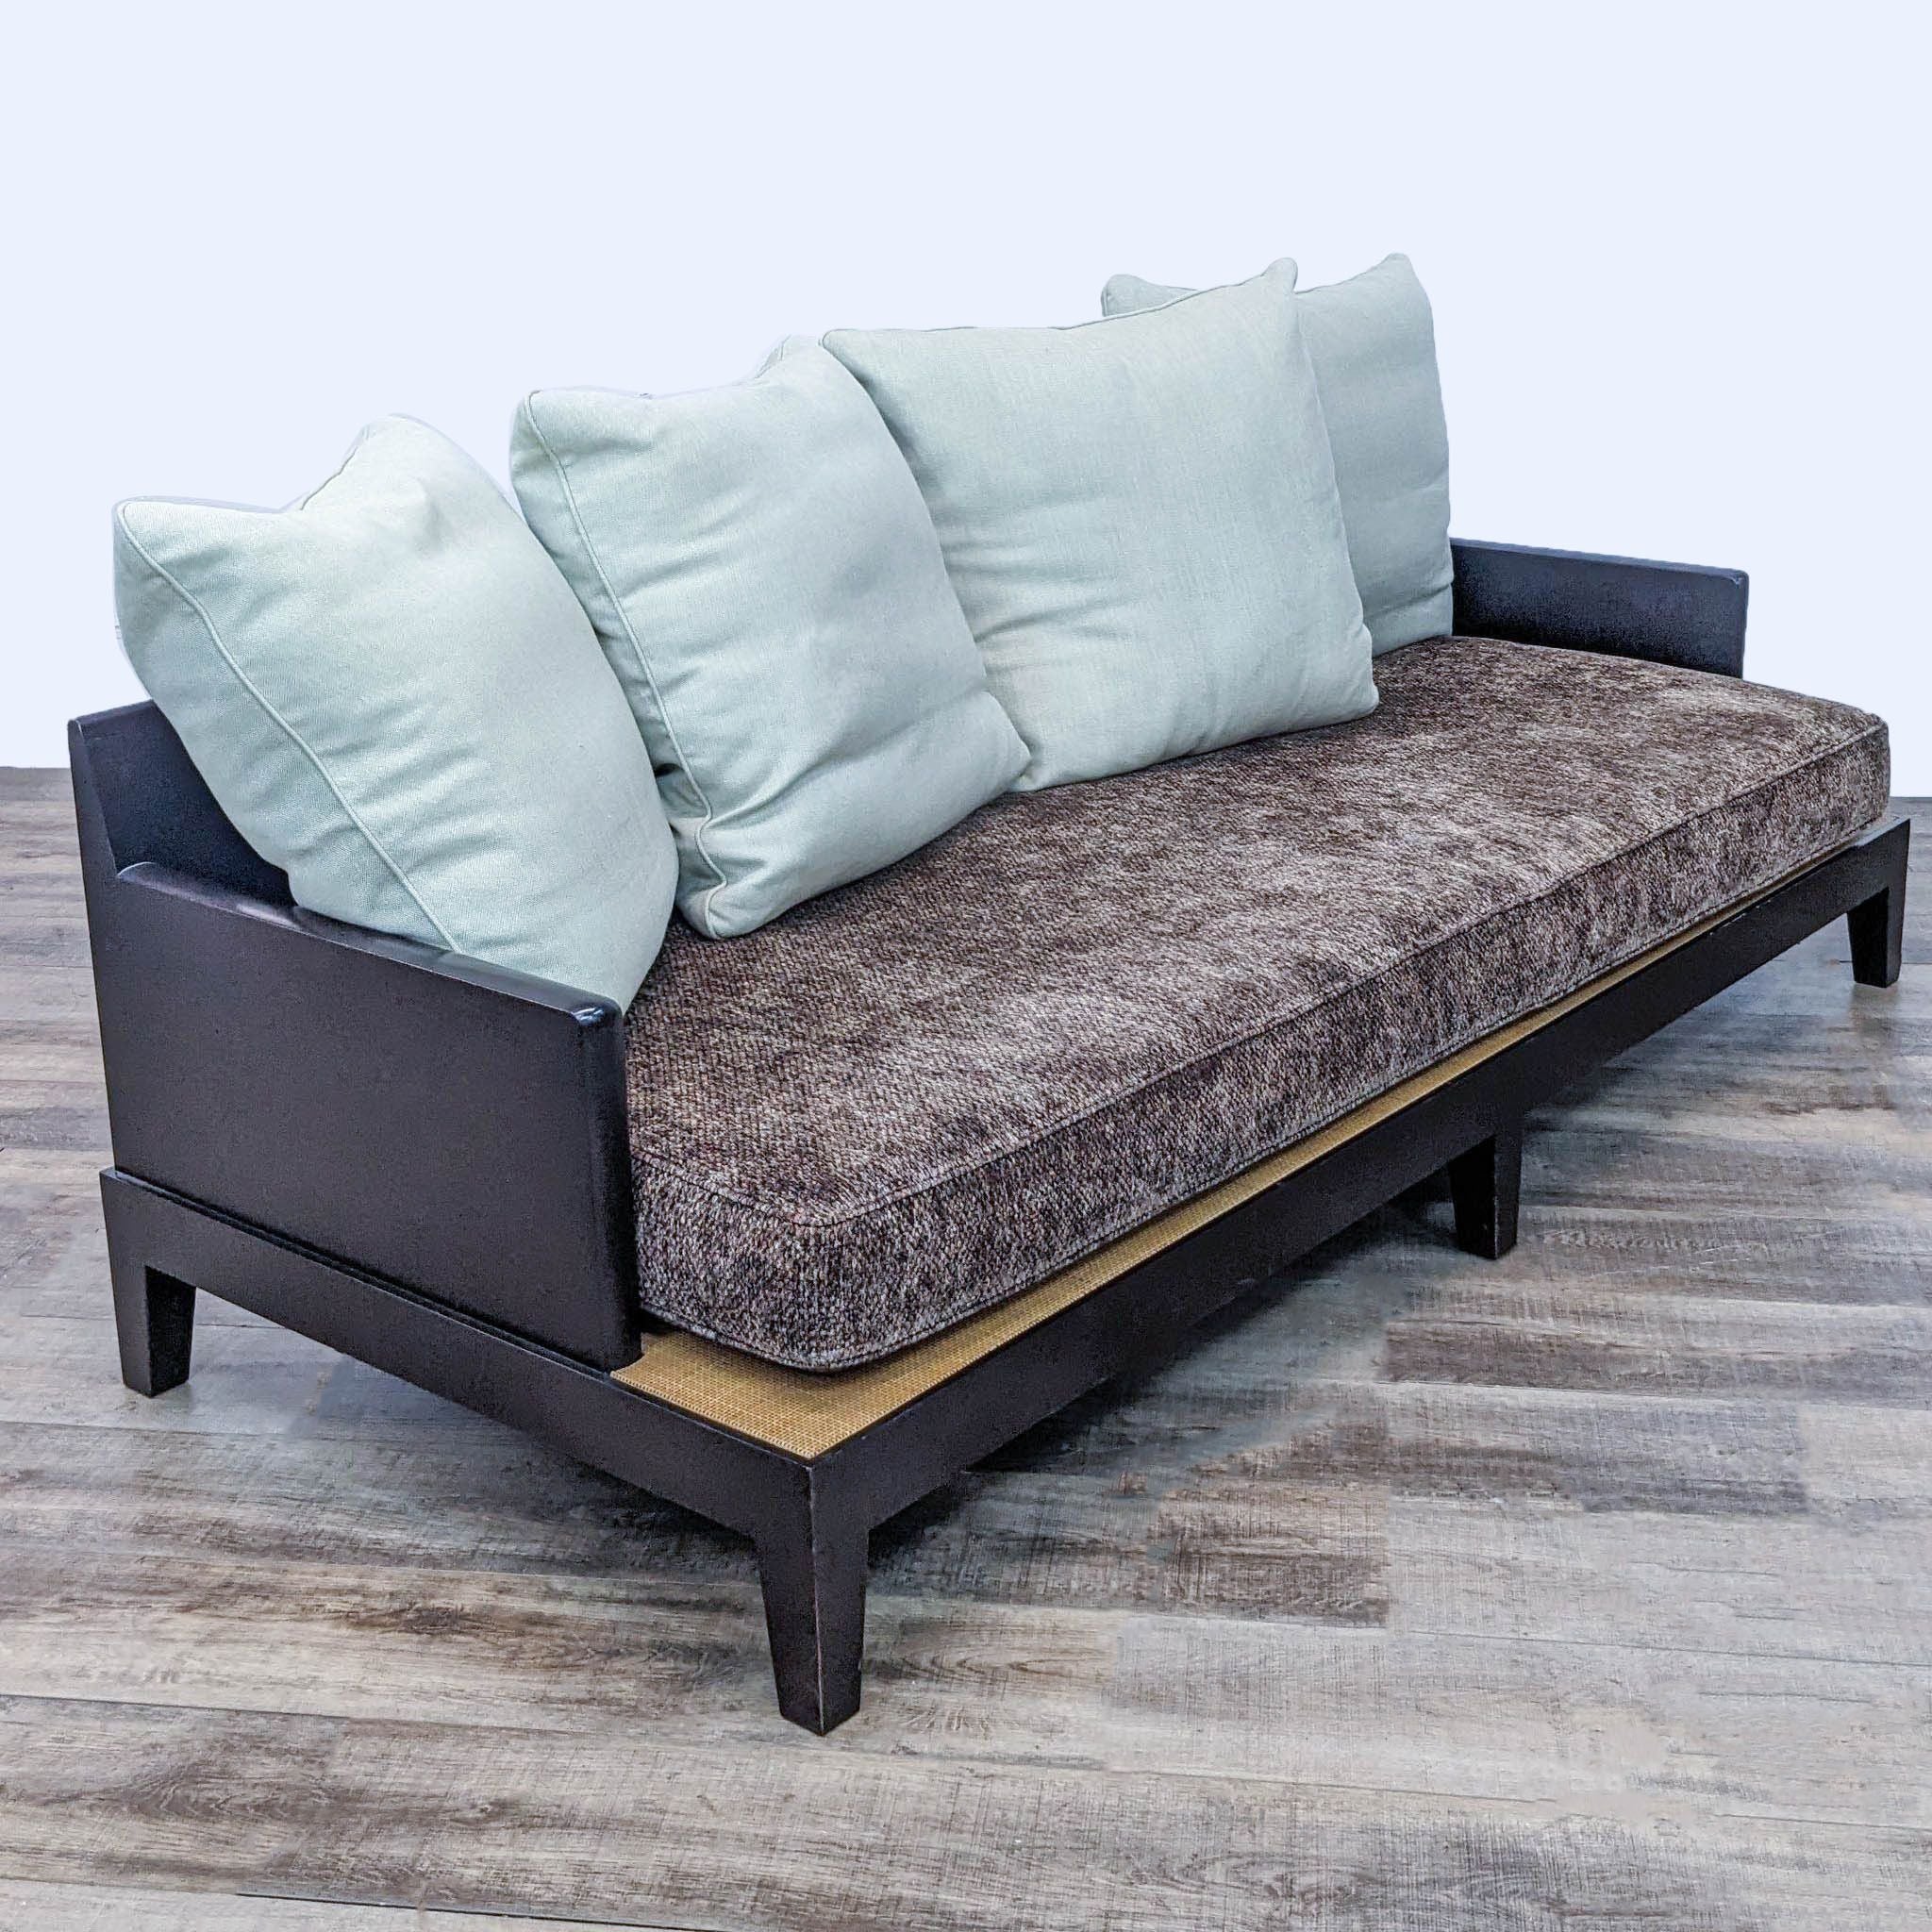 Modern sofa by Reperch with narrow arms, removable brown and blue cushions shown from various angles.